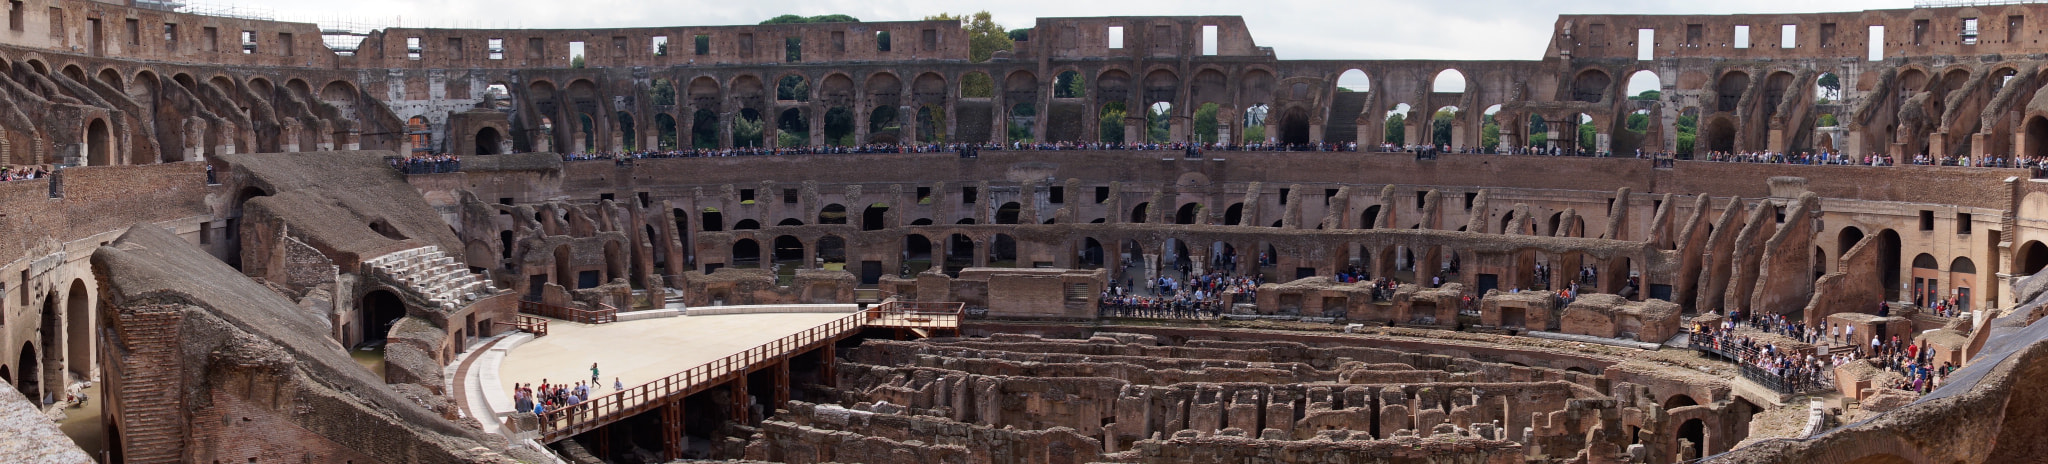 Sony SLT-A57 sample photo. An inside panoramic view of the coliseum in rome, italy photography